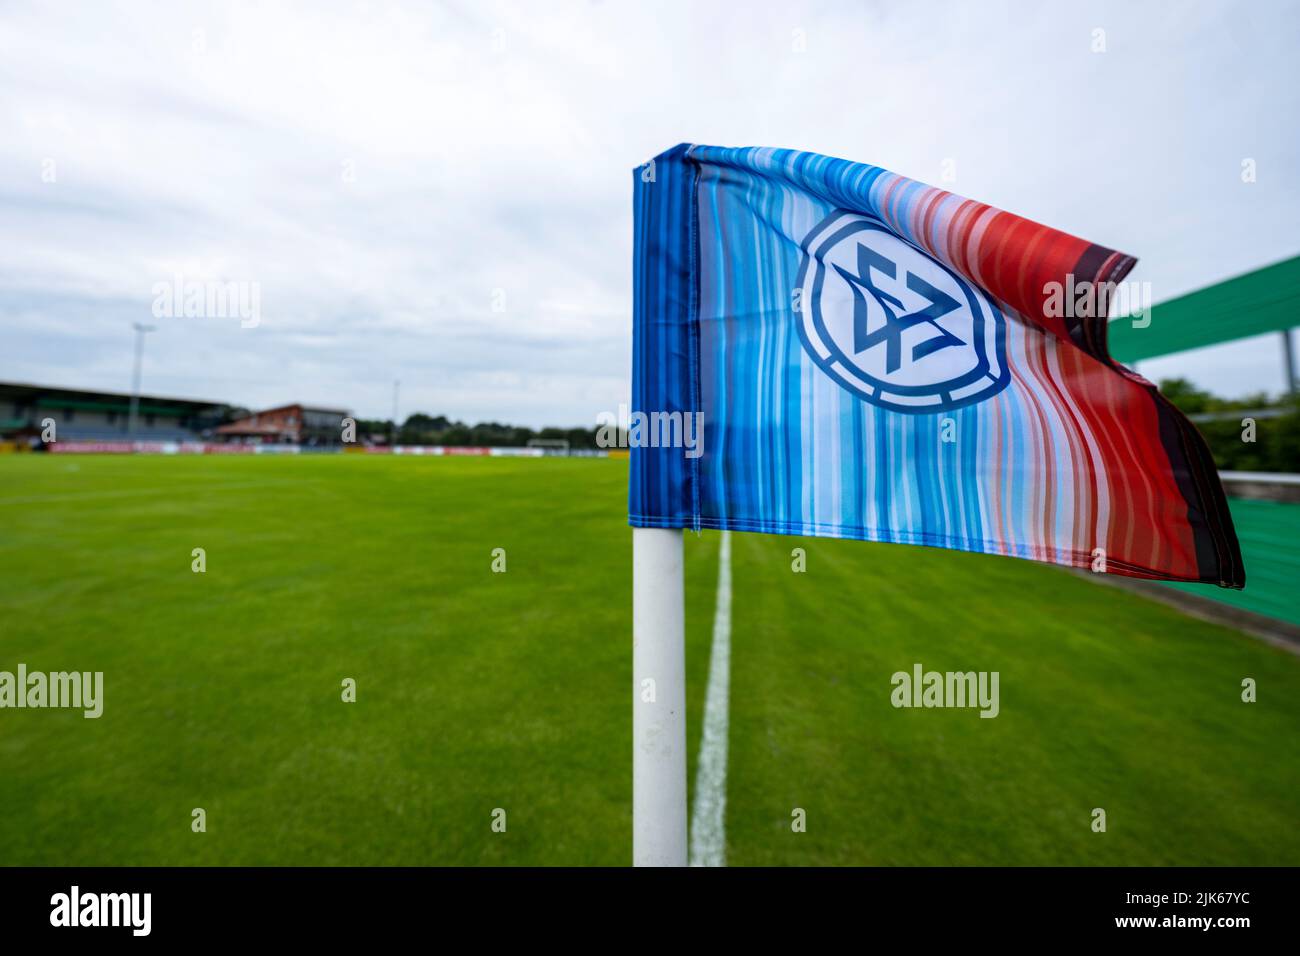 Rehden, Germany. 31st July, 2022. Soccer: DFB Cup, BSV Rehden - SV Sandhausen, 1st round, Waldsportstätten sports field: The corner flag with DFB logo is blowing in the wind. Credit: David Inderlied/dpa - IMPORTANT NOTE: In accordance with the requirements of the DFL Deutsche Fußball Liga and the DFB Deutscher Fußball-Bund, it is prohibited to use or have used photographs taken in the stadium and/or of the match in the form of sequence pictures and/or video-like photo series./dpa/Alamy Live News Stock Photo